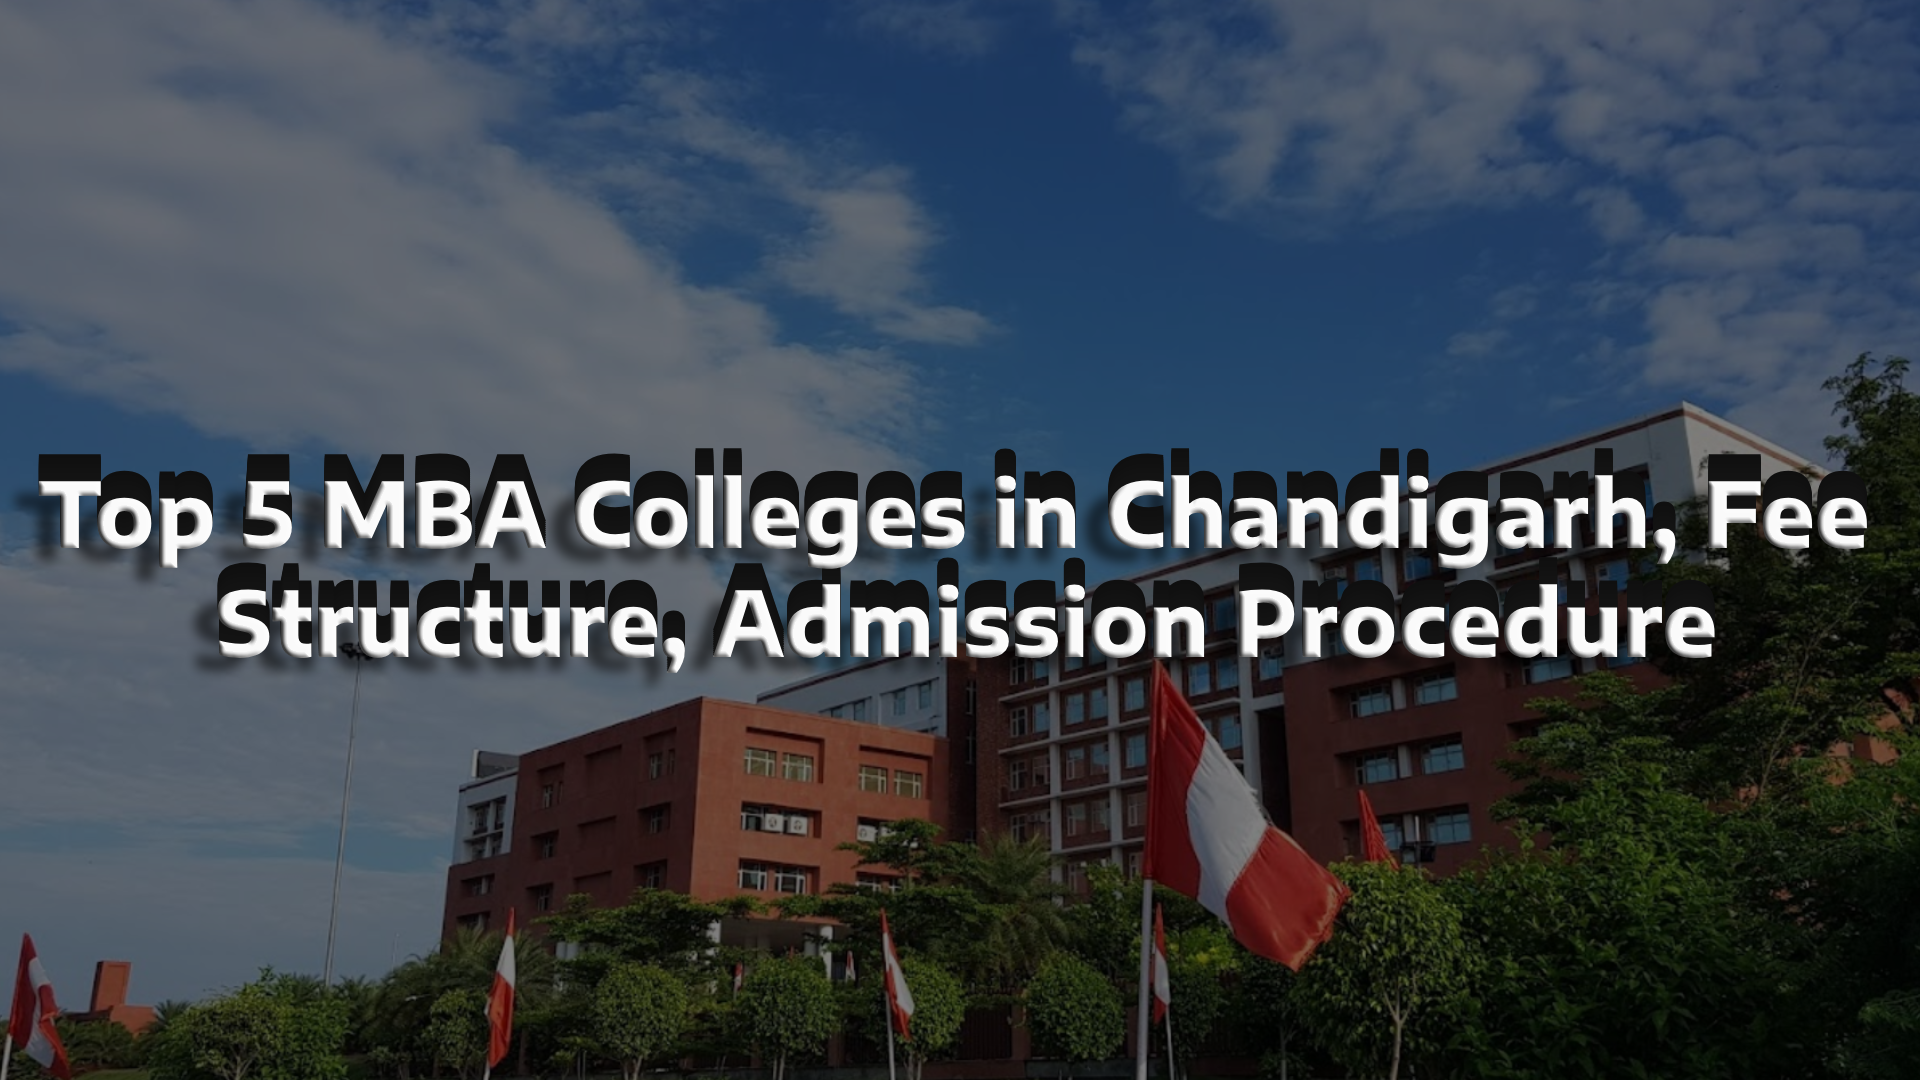 Top 5 MBA Colleges in Chandigarh, Fee Structure, Admission Procedure